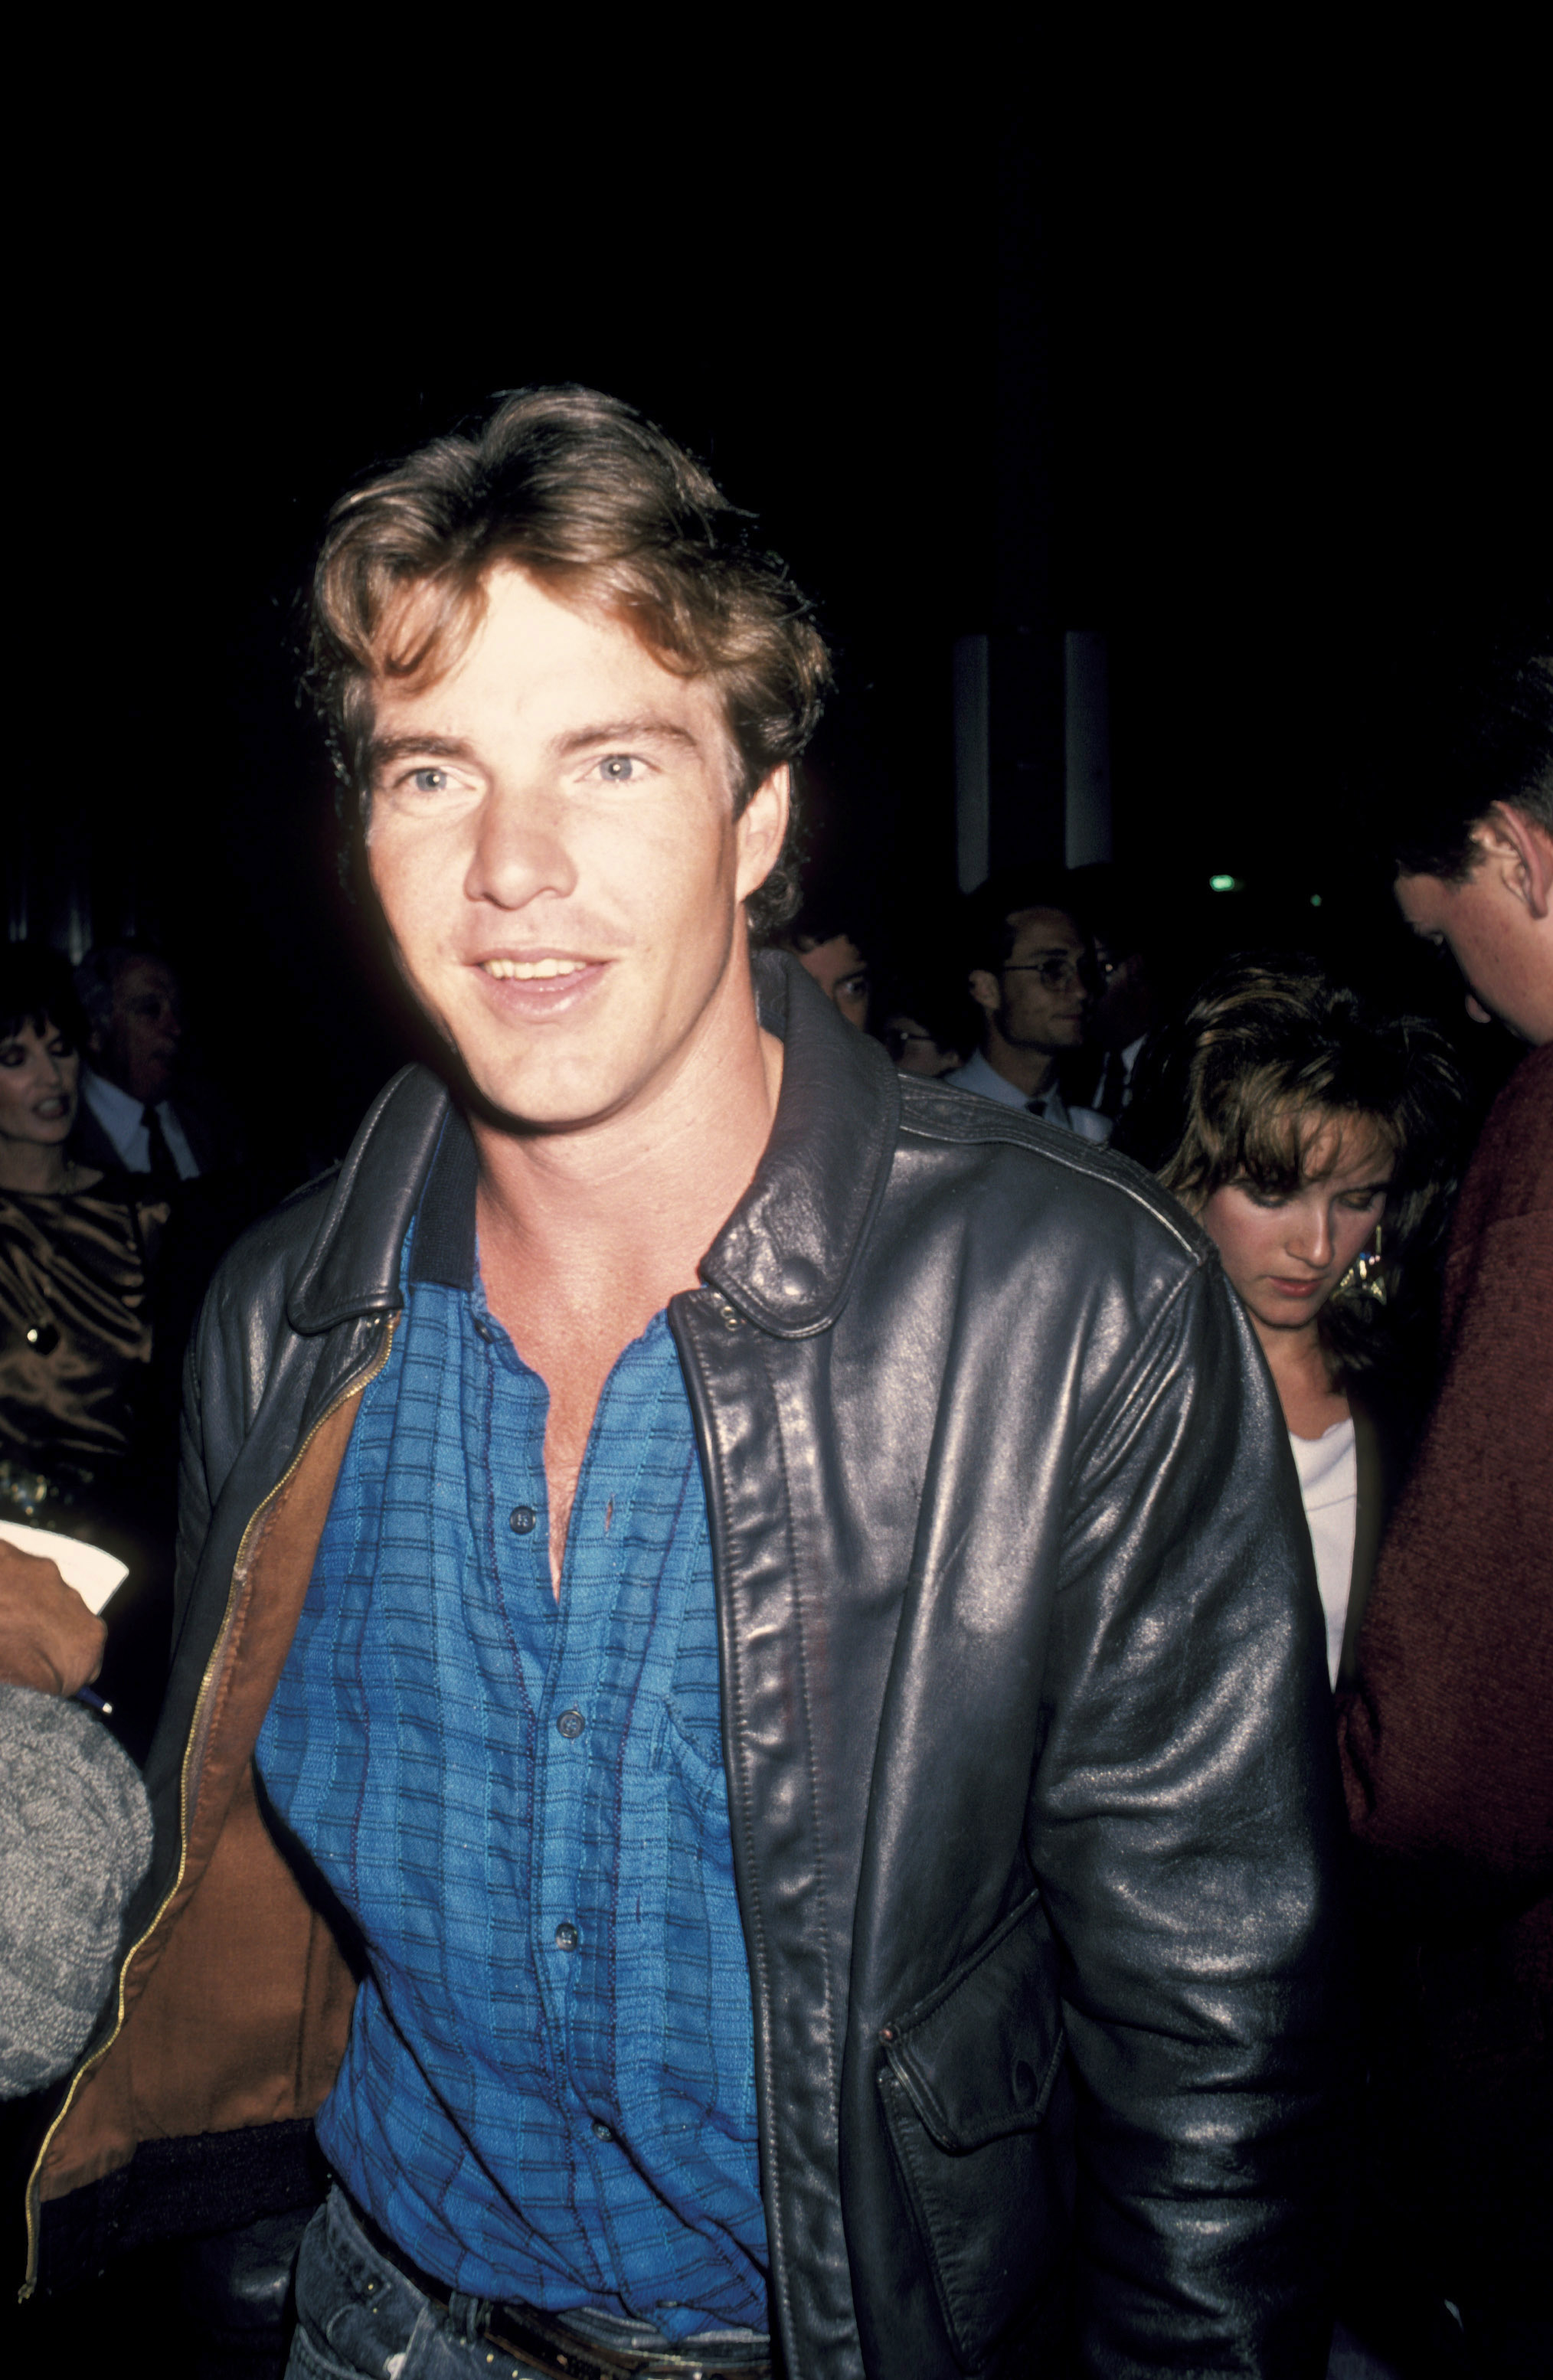 Dennis Quaid at the "Legal Eagles" premiere in Los Angeles, 1986 | Source: Getty Images